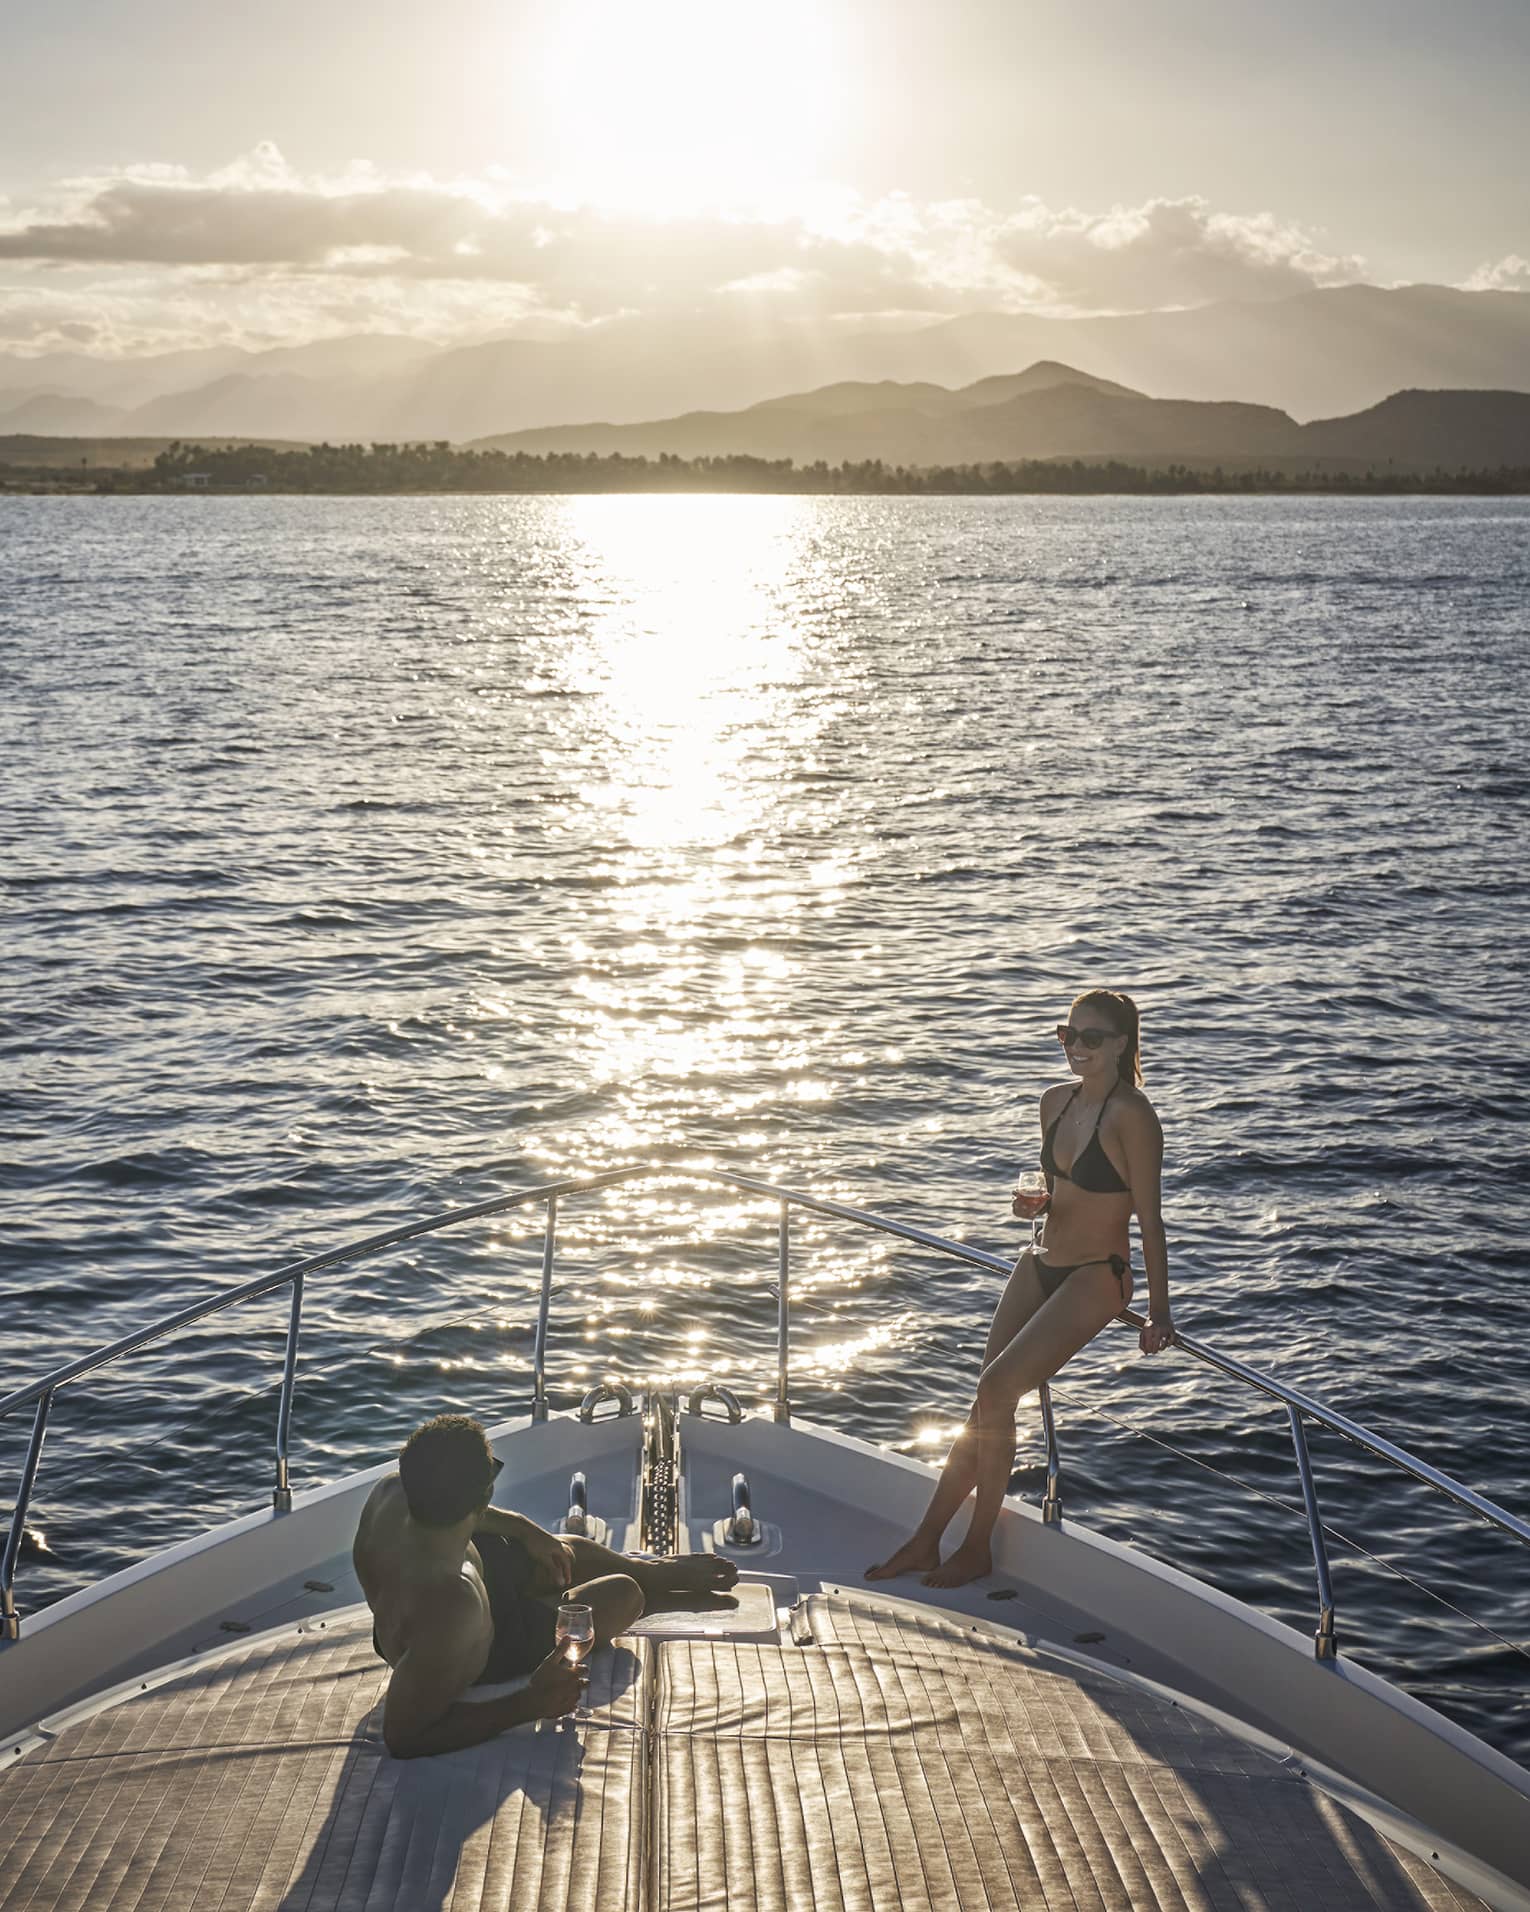 At the bow of a luxurious boat, a couple in swimwear lounges while enjoying the sun's glowing reflection and a glass of wine.